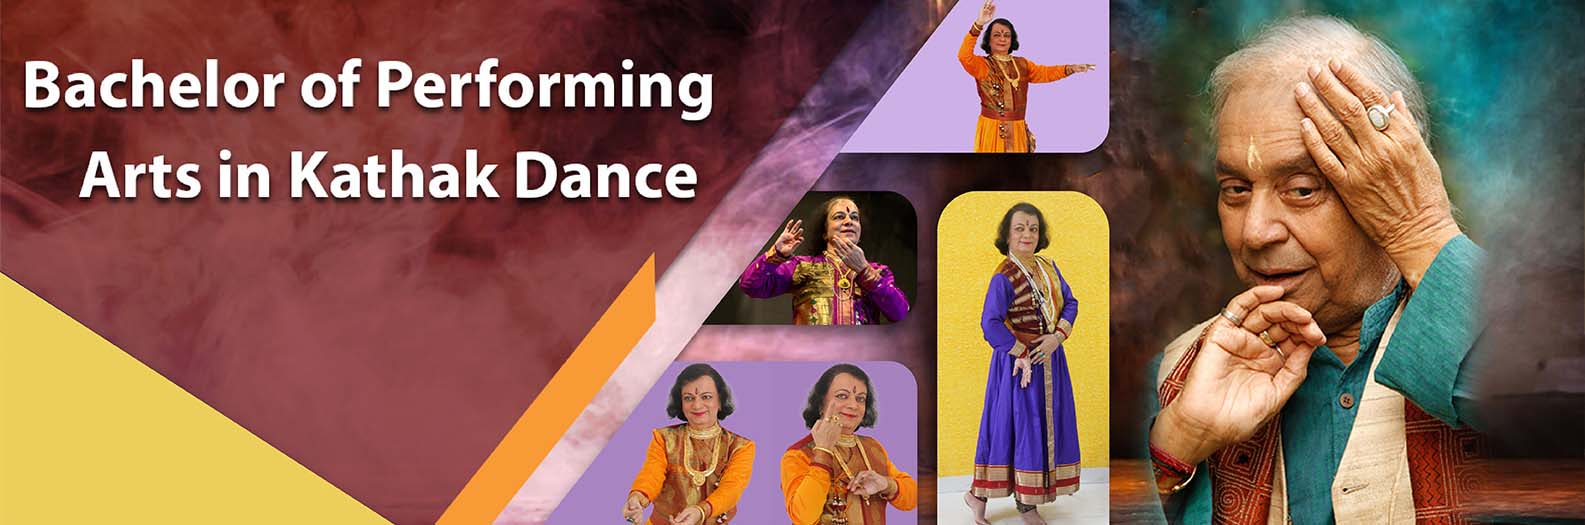 Bachelor of Performing Arts in Kathak Dance 